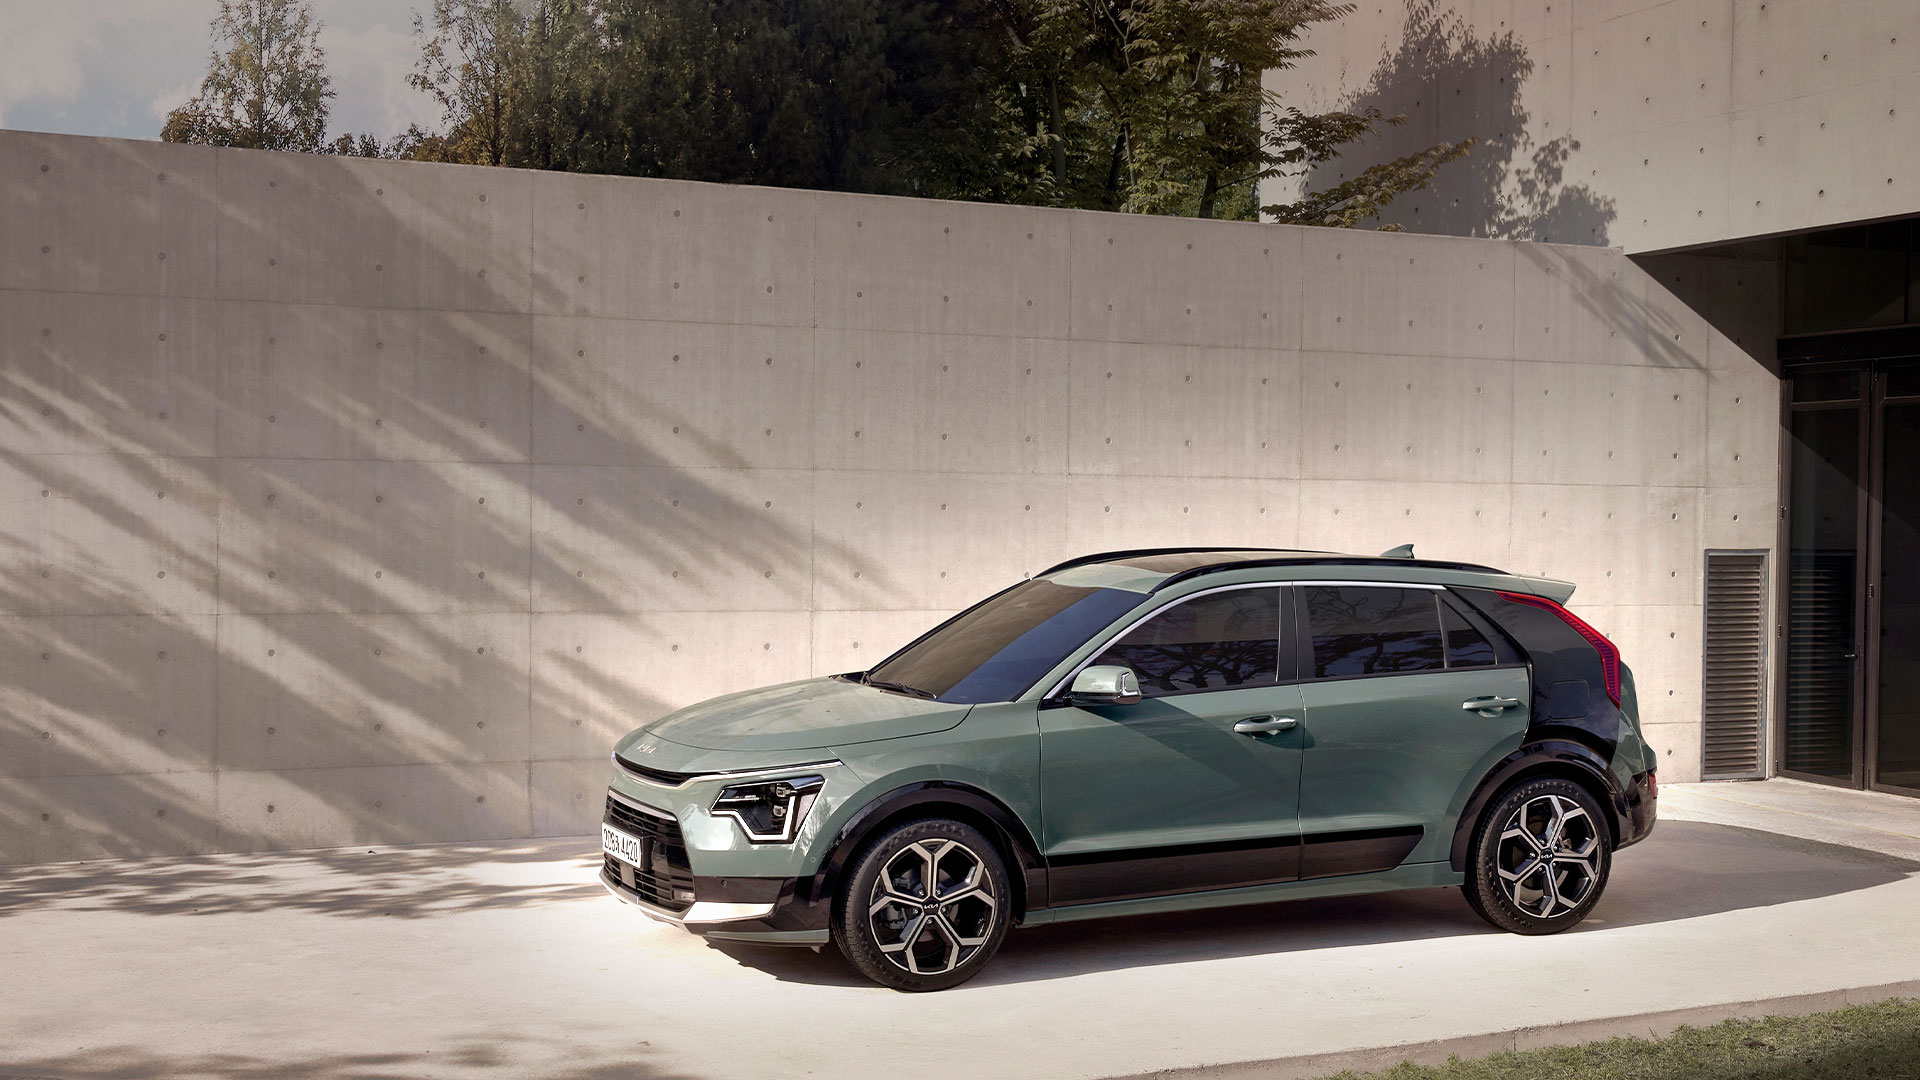 The all-new Kia Niro standing in front of the architecture of wood tone